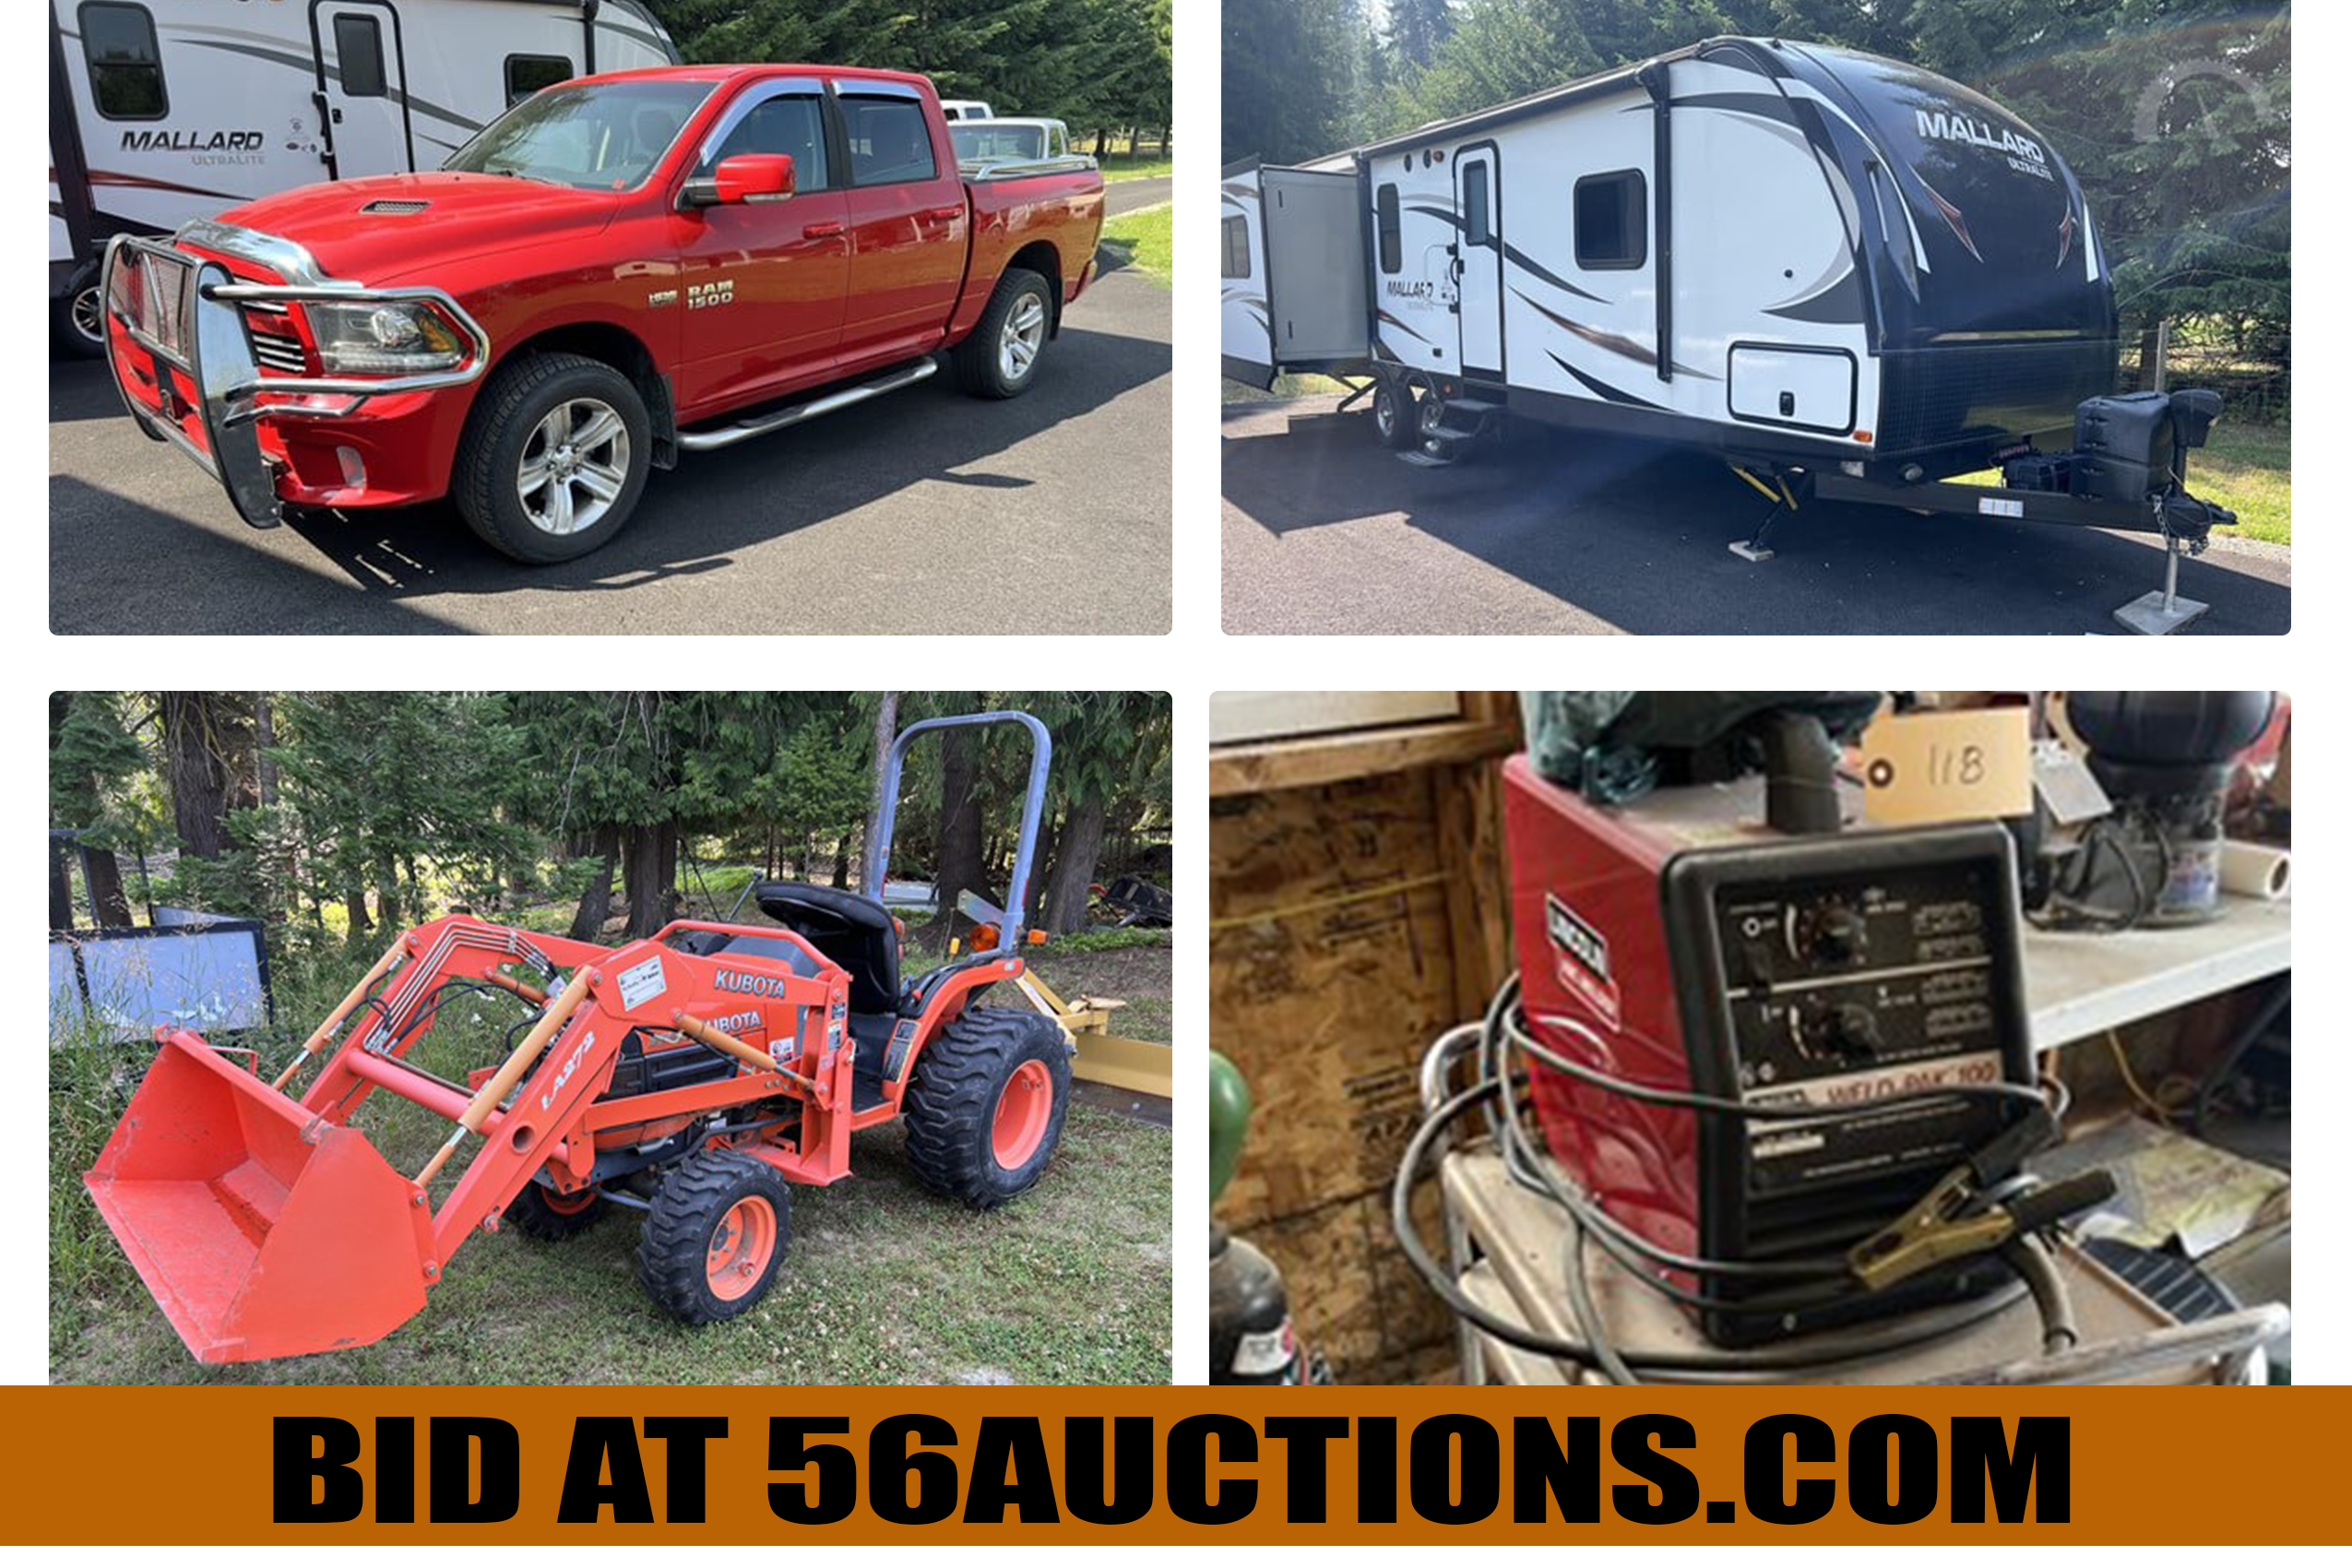 ONLINE EQUIPMENT AUCTION ENDS Sept.  ONLINE EQUIPMENT AUCTION ENDS Sept. 27th. Bonners Ferry, ID. Travel Trailer, 2013 Dodge, Lawn Mowers and more! Bid at 56auctions.com.